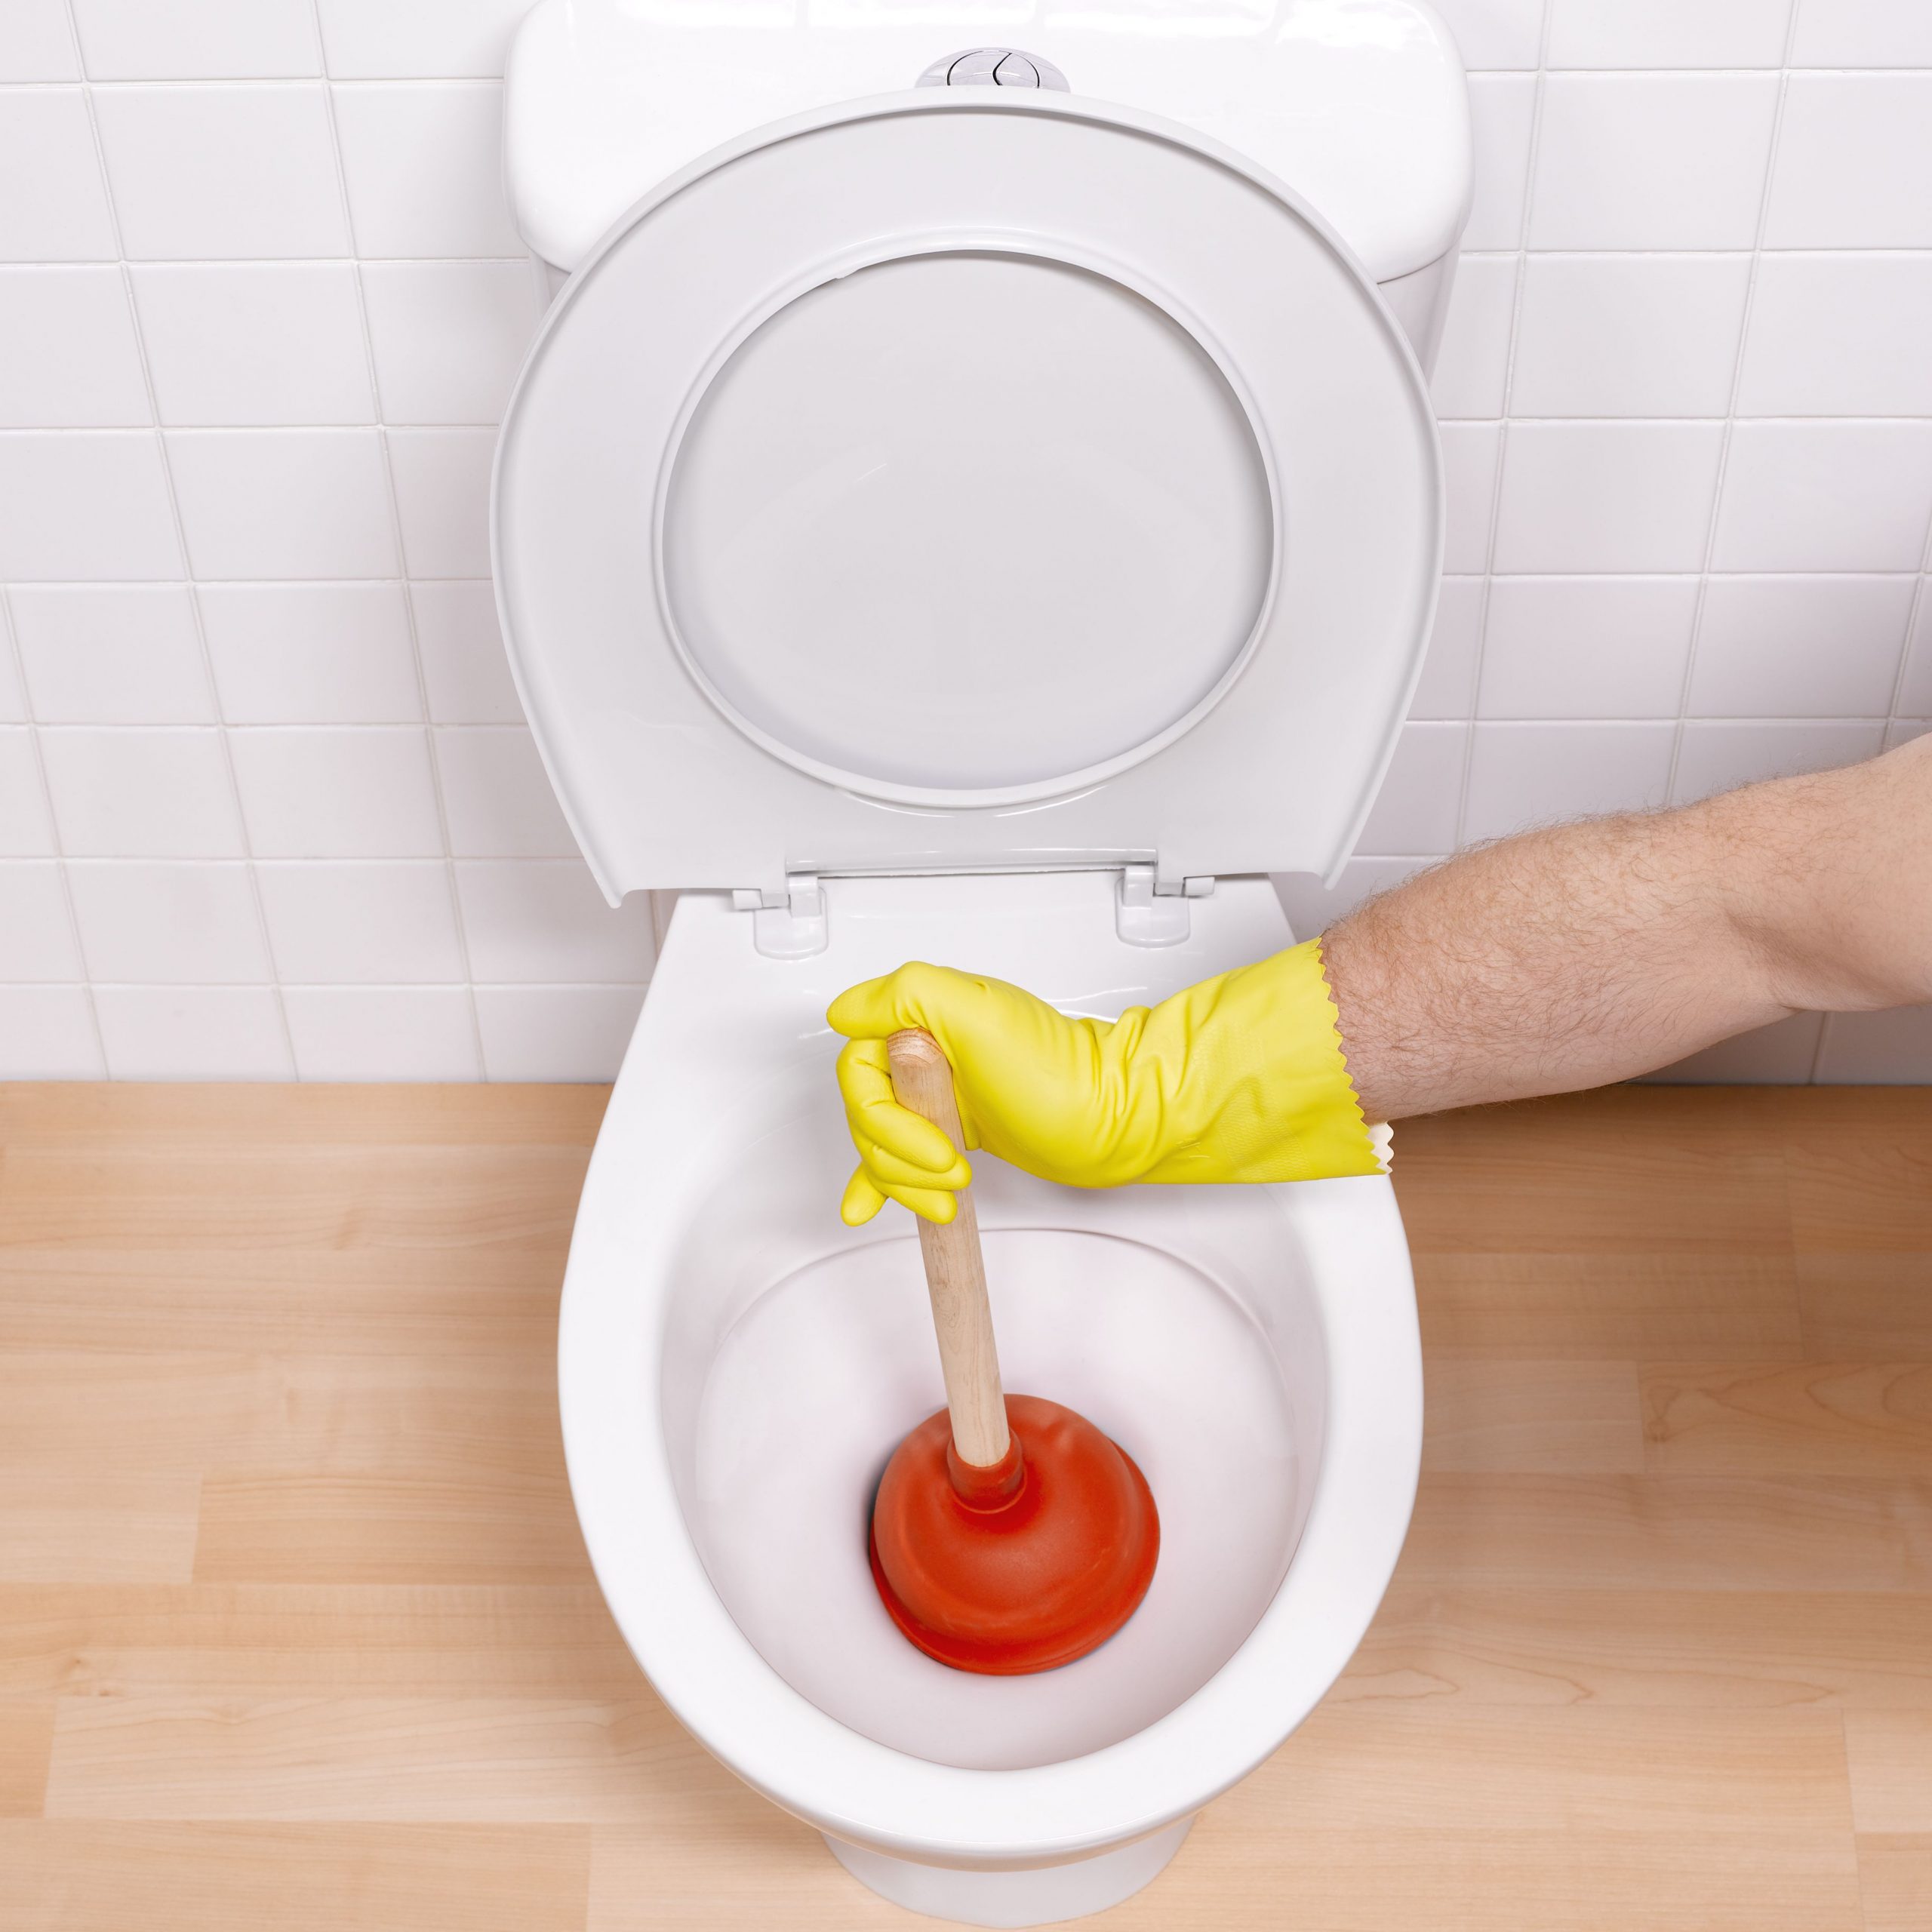 How To Unclog A Toilet With Baking Powder 